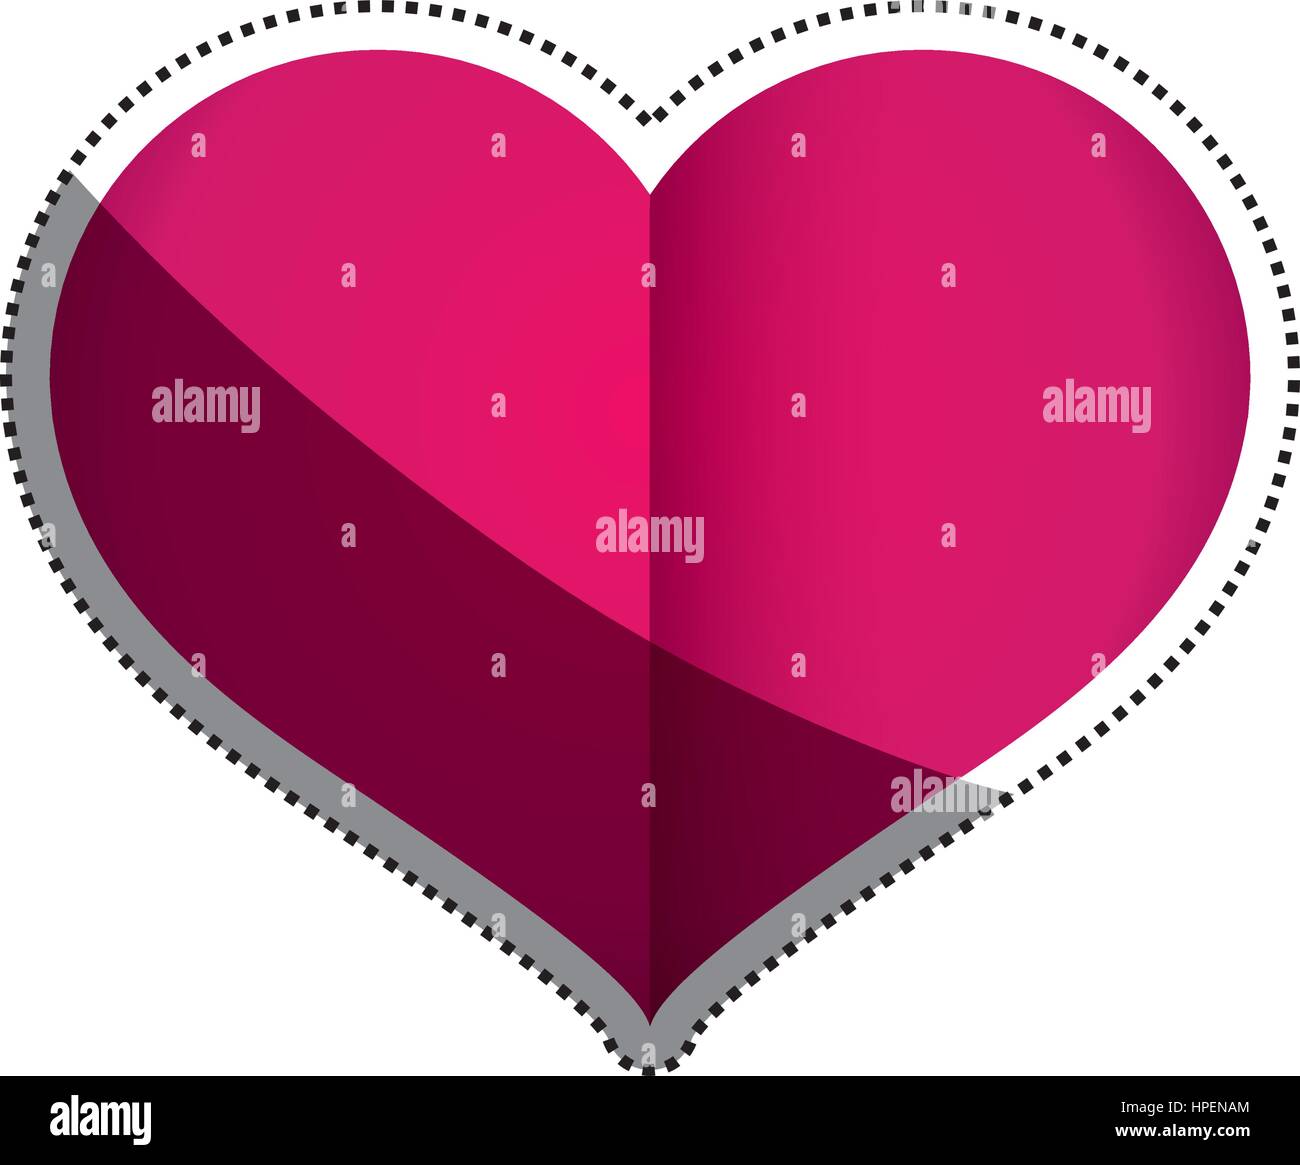 Love and romanticism Stock Vector